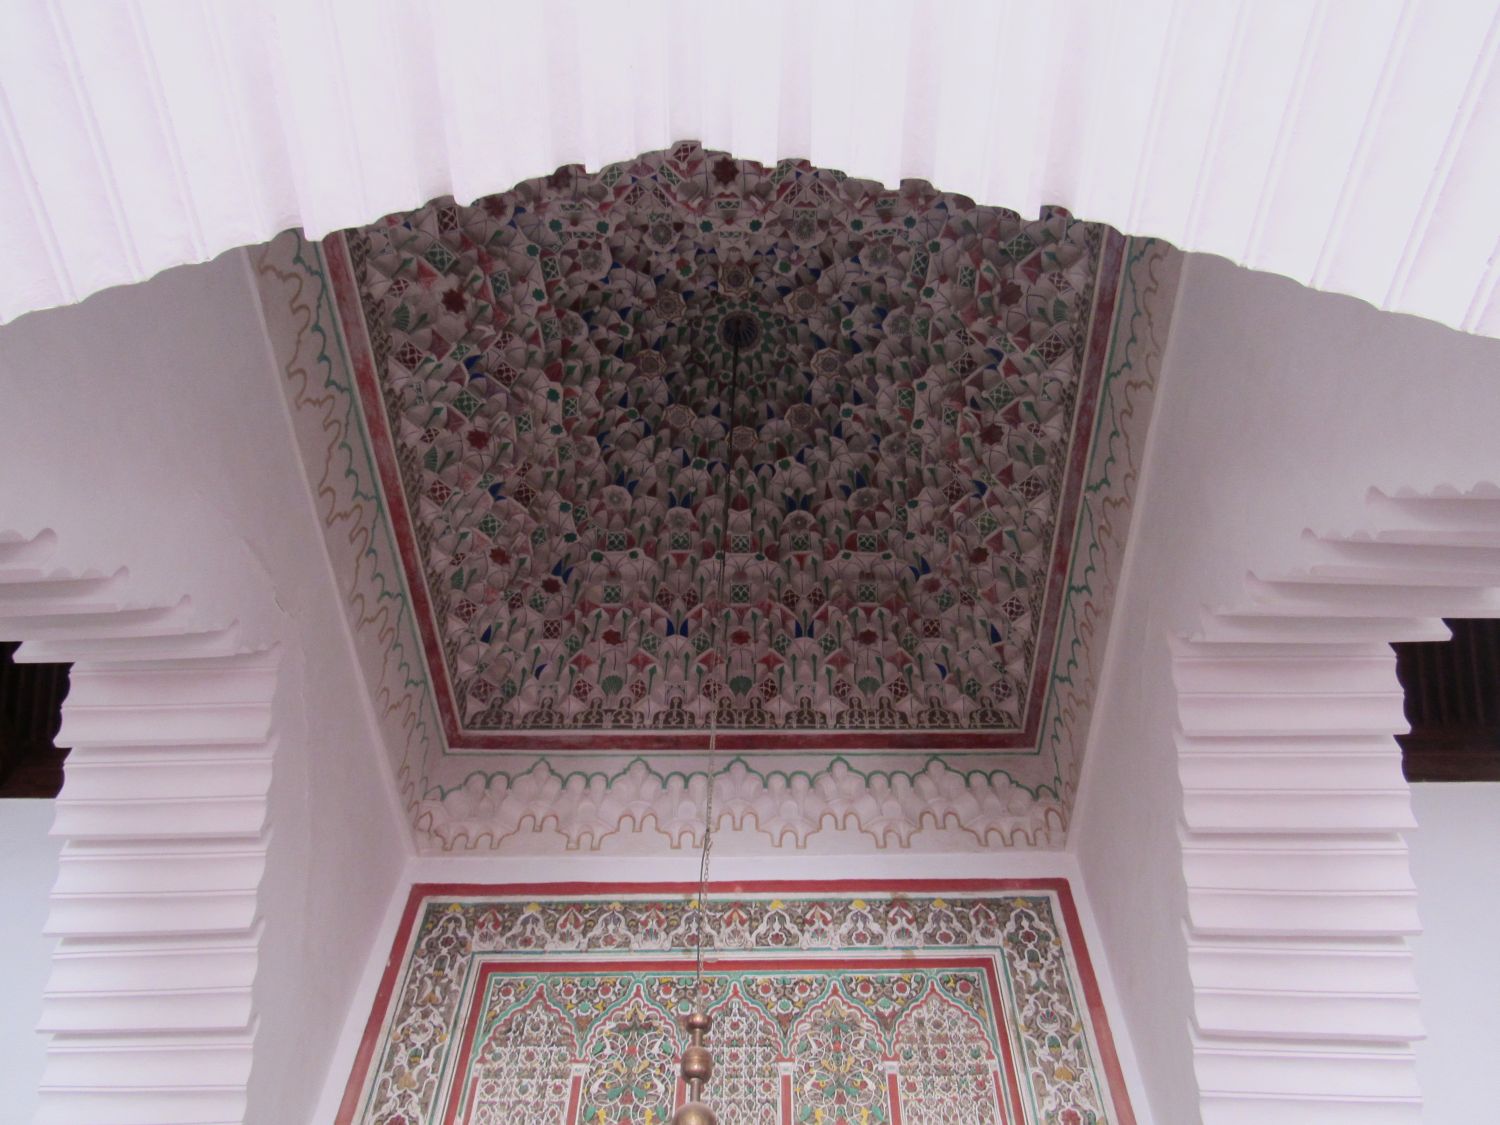 Interior view of the painted muqarnas dome of the mihrab